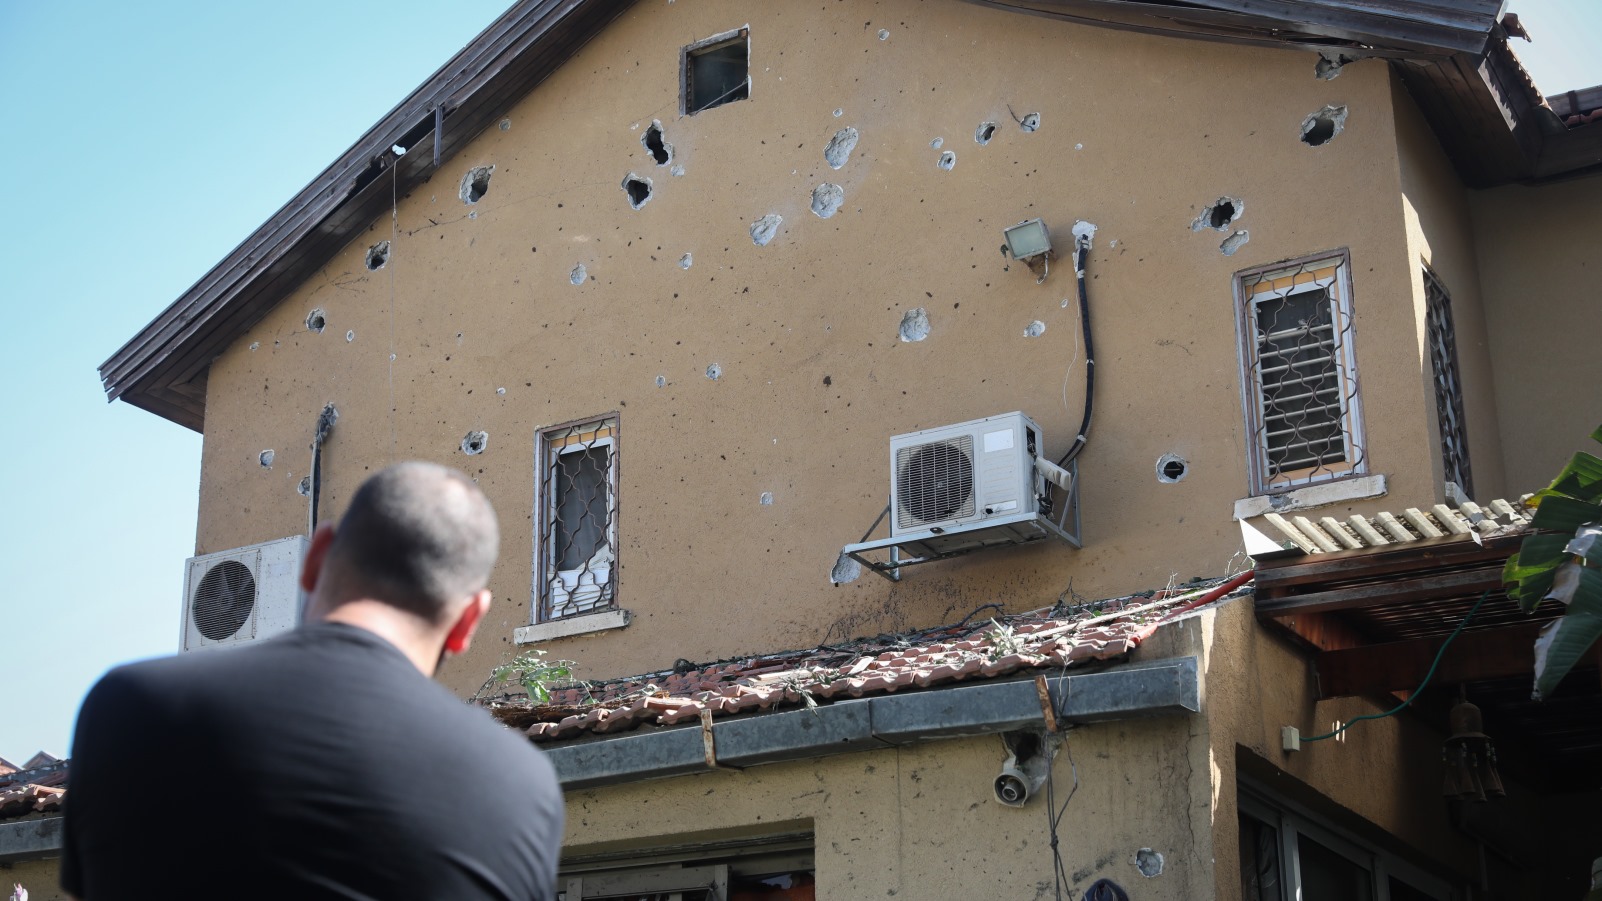 The home of an Israeli man killed from shrapnel wounds after his house was hit by a Gazan rocket in the southern city of Ashkelon. Photo by Noam Rivkin Fenton/Flash90